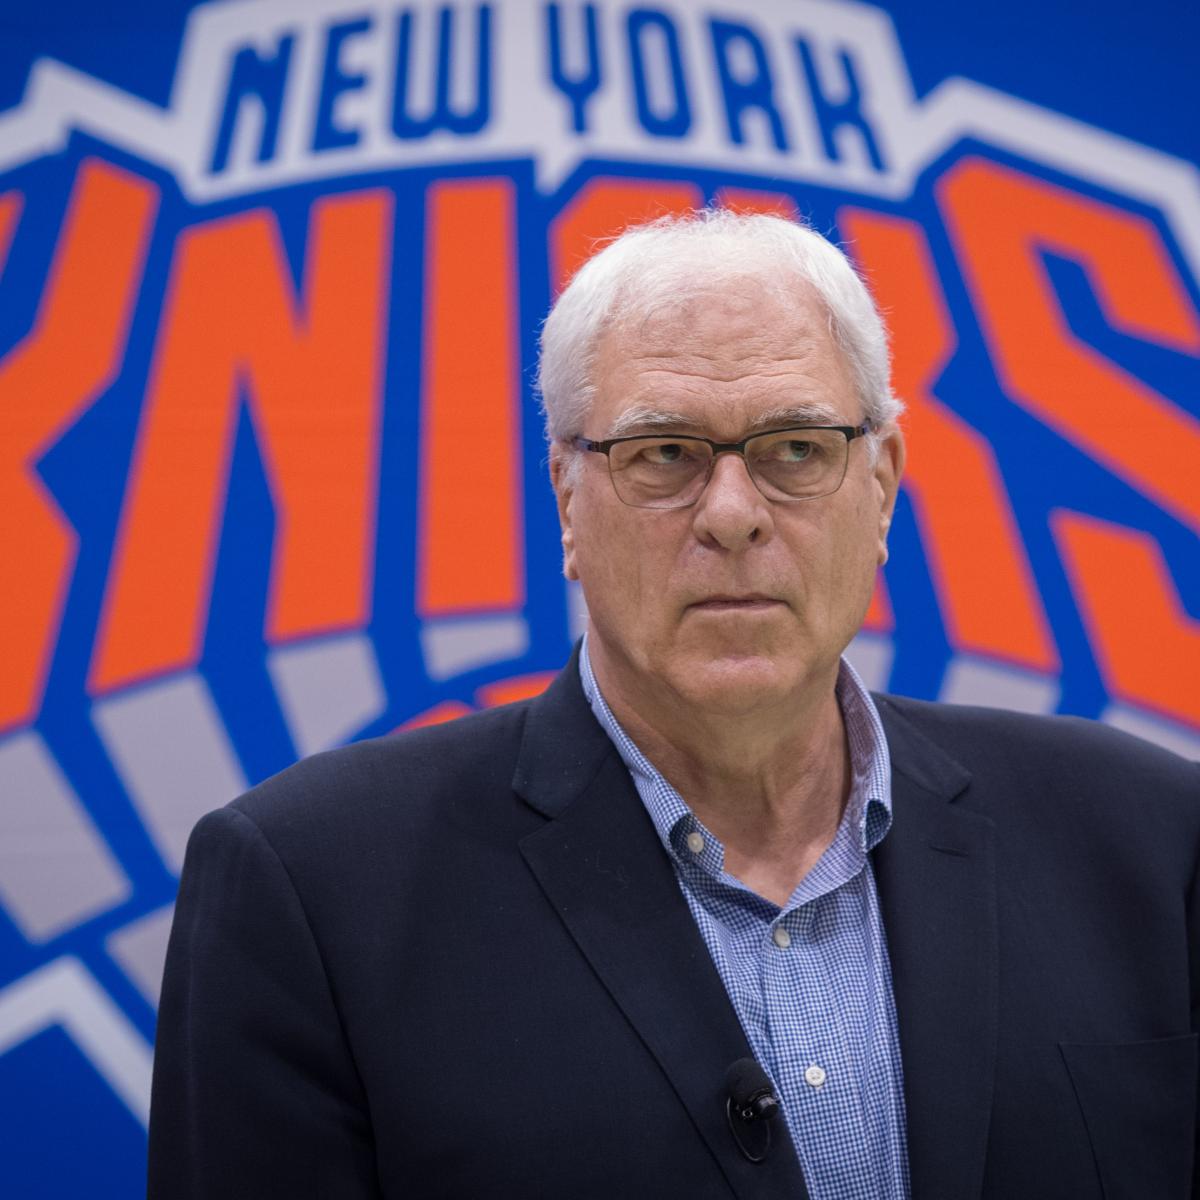 The All-Phil Jackson Team, News, Scores, Highlights, Stats, and Rumors